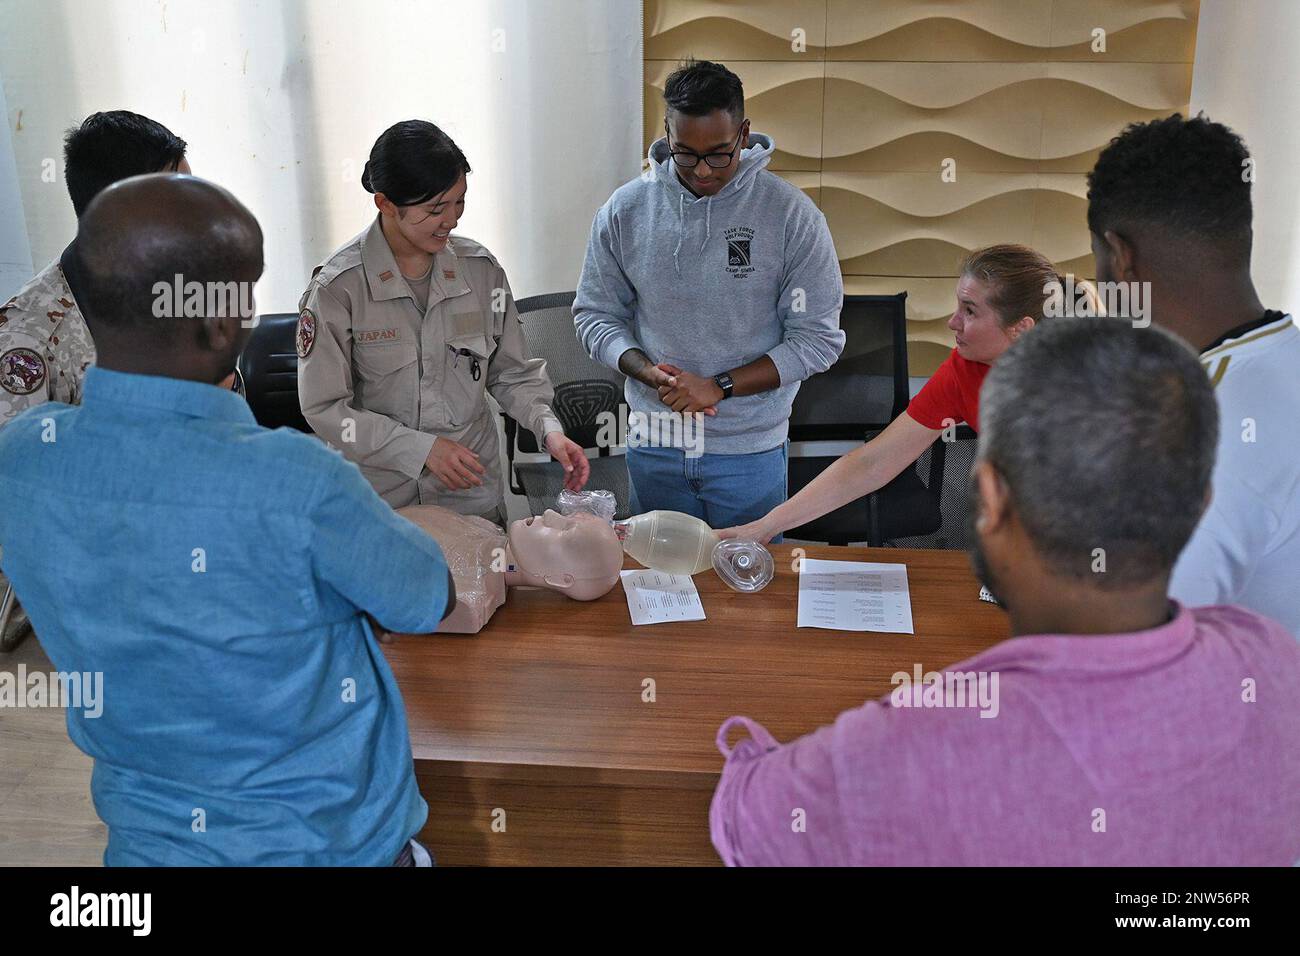 Army Lt. Col. Rhonda Dyre, Civil Affairs-Africa functional specialty team public health nurse, with medical members of the Japan Self-Defense Force and Spc. Reduan Hossain, Task Force Wolfhound medic, demonstrates CPR techniques to Djiboutian nurses during a knowledge exchange at the Djibouti Minister of Health complex in Djibouti City, Djibouti, Jan 30, 2023. The knowledge exchange educated Djiboutian nurses in basic life-saving techniques, CPR, maternal health, and infant care. Stock Photo